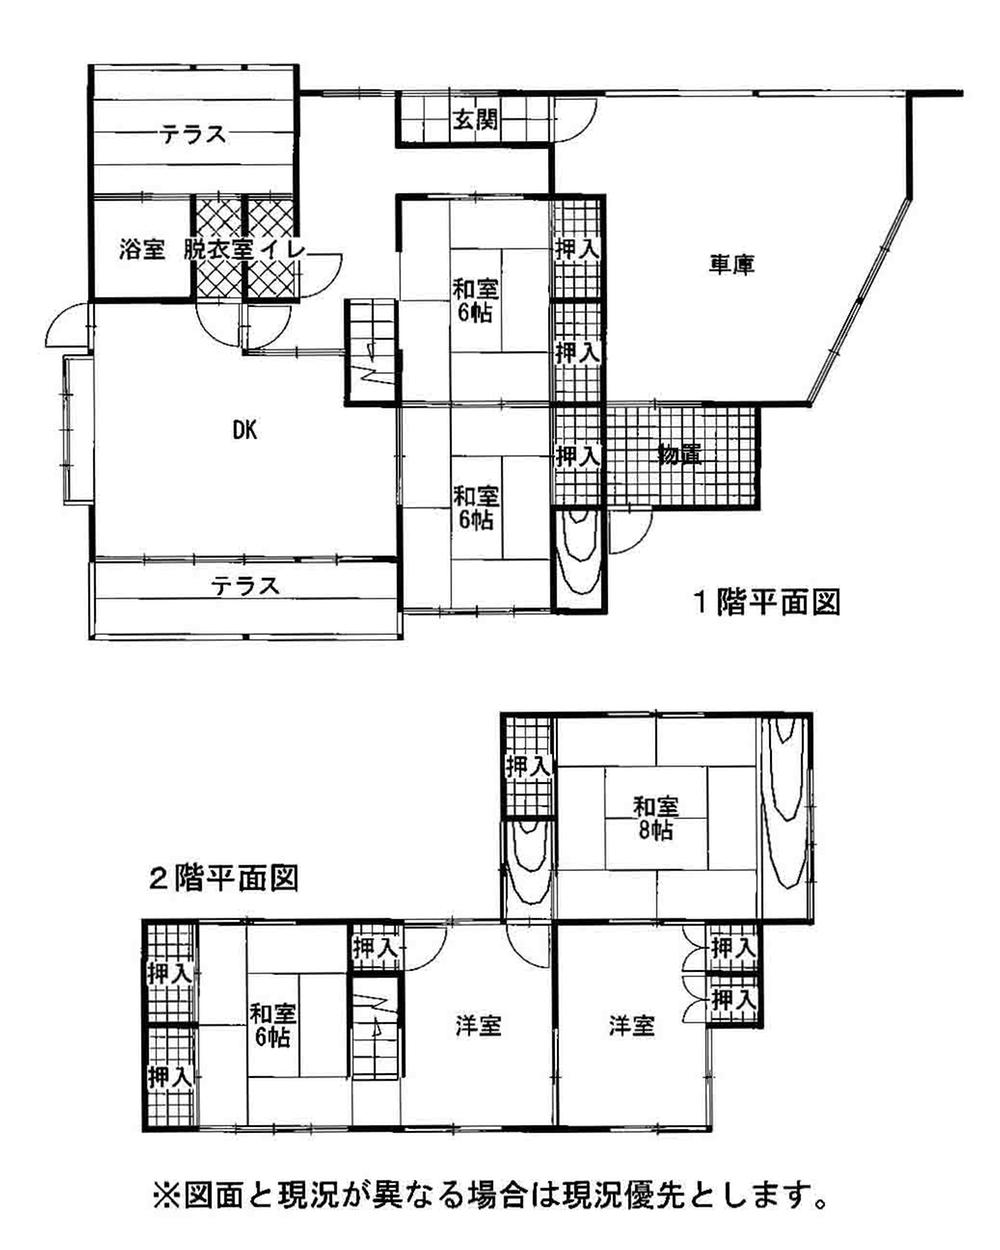 Floor plan. 5.3 million yen, 6DK, Land area 154.89 sq m , Building area 160.65 sq m 6DK There are two cars garage